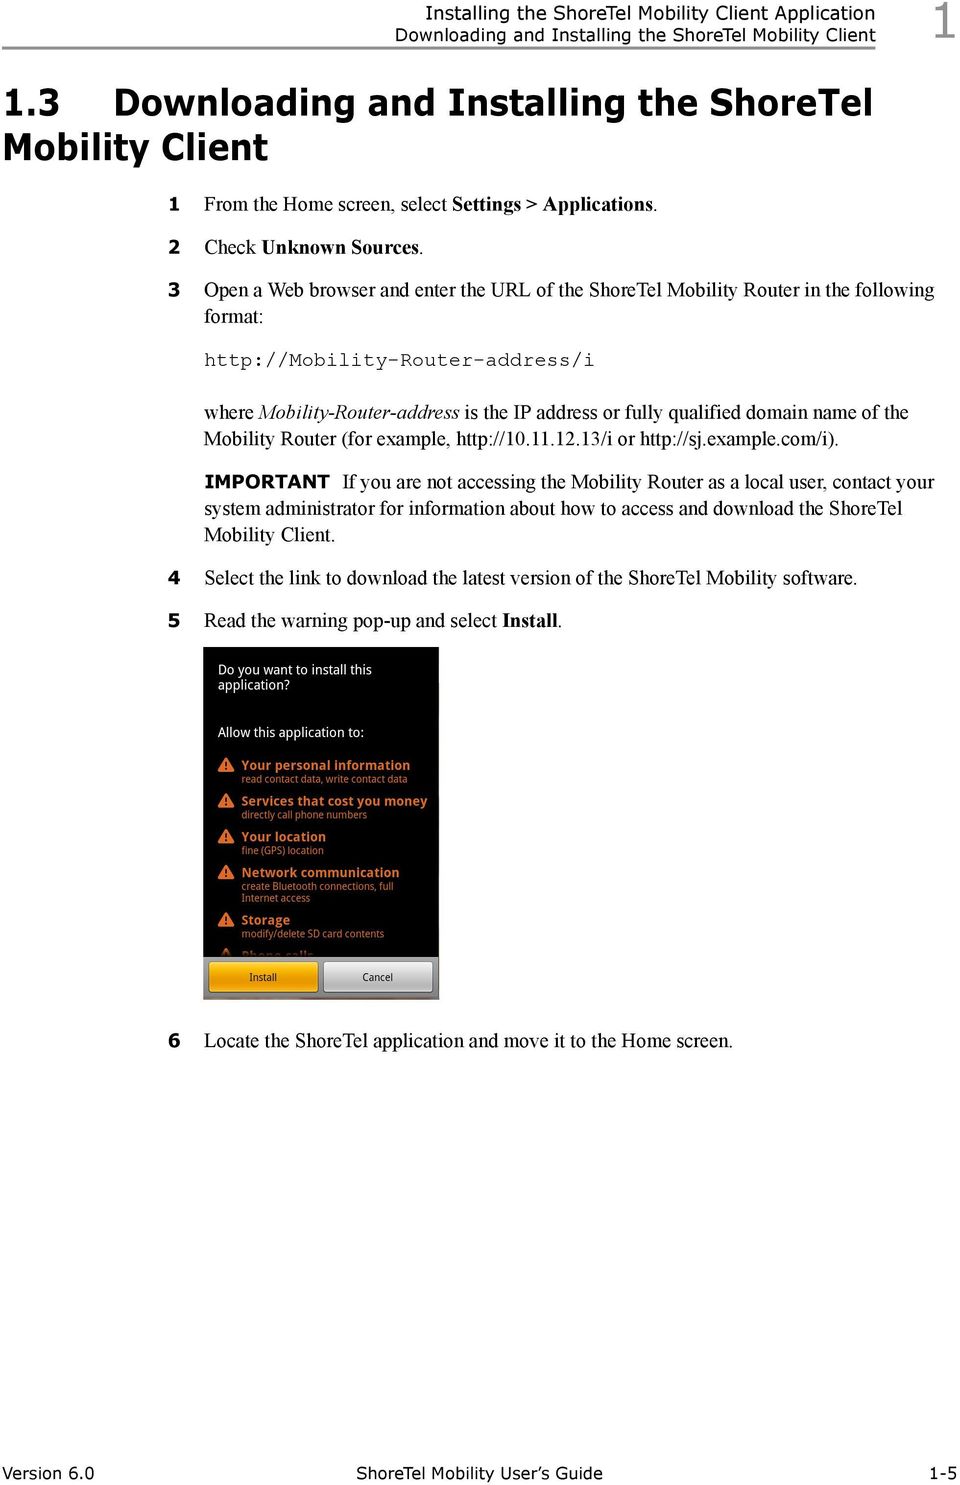 3 Open a Web browser and enter the URL of the ShoreTel Mobility Router in the following format: http://mobility-router-address/i where Mobility-Router-address is the IP address or fully qualified